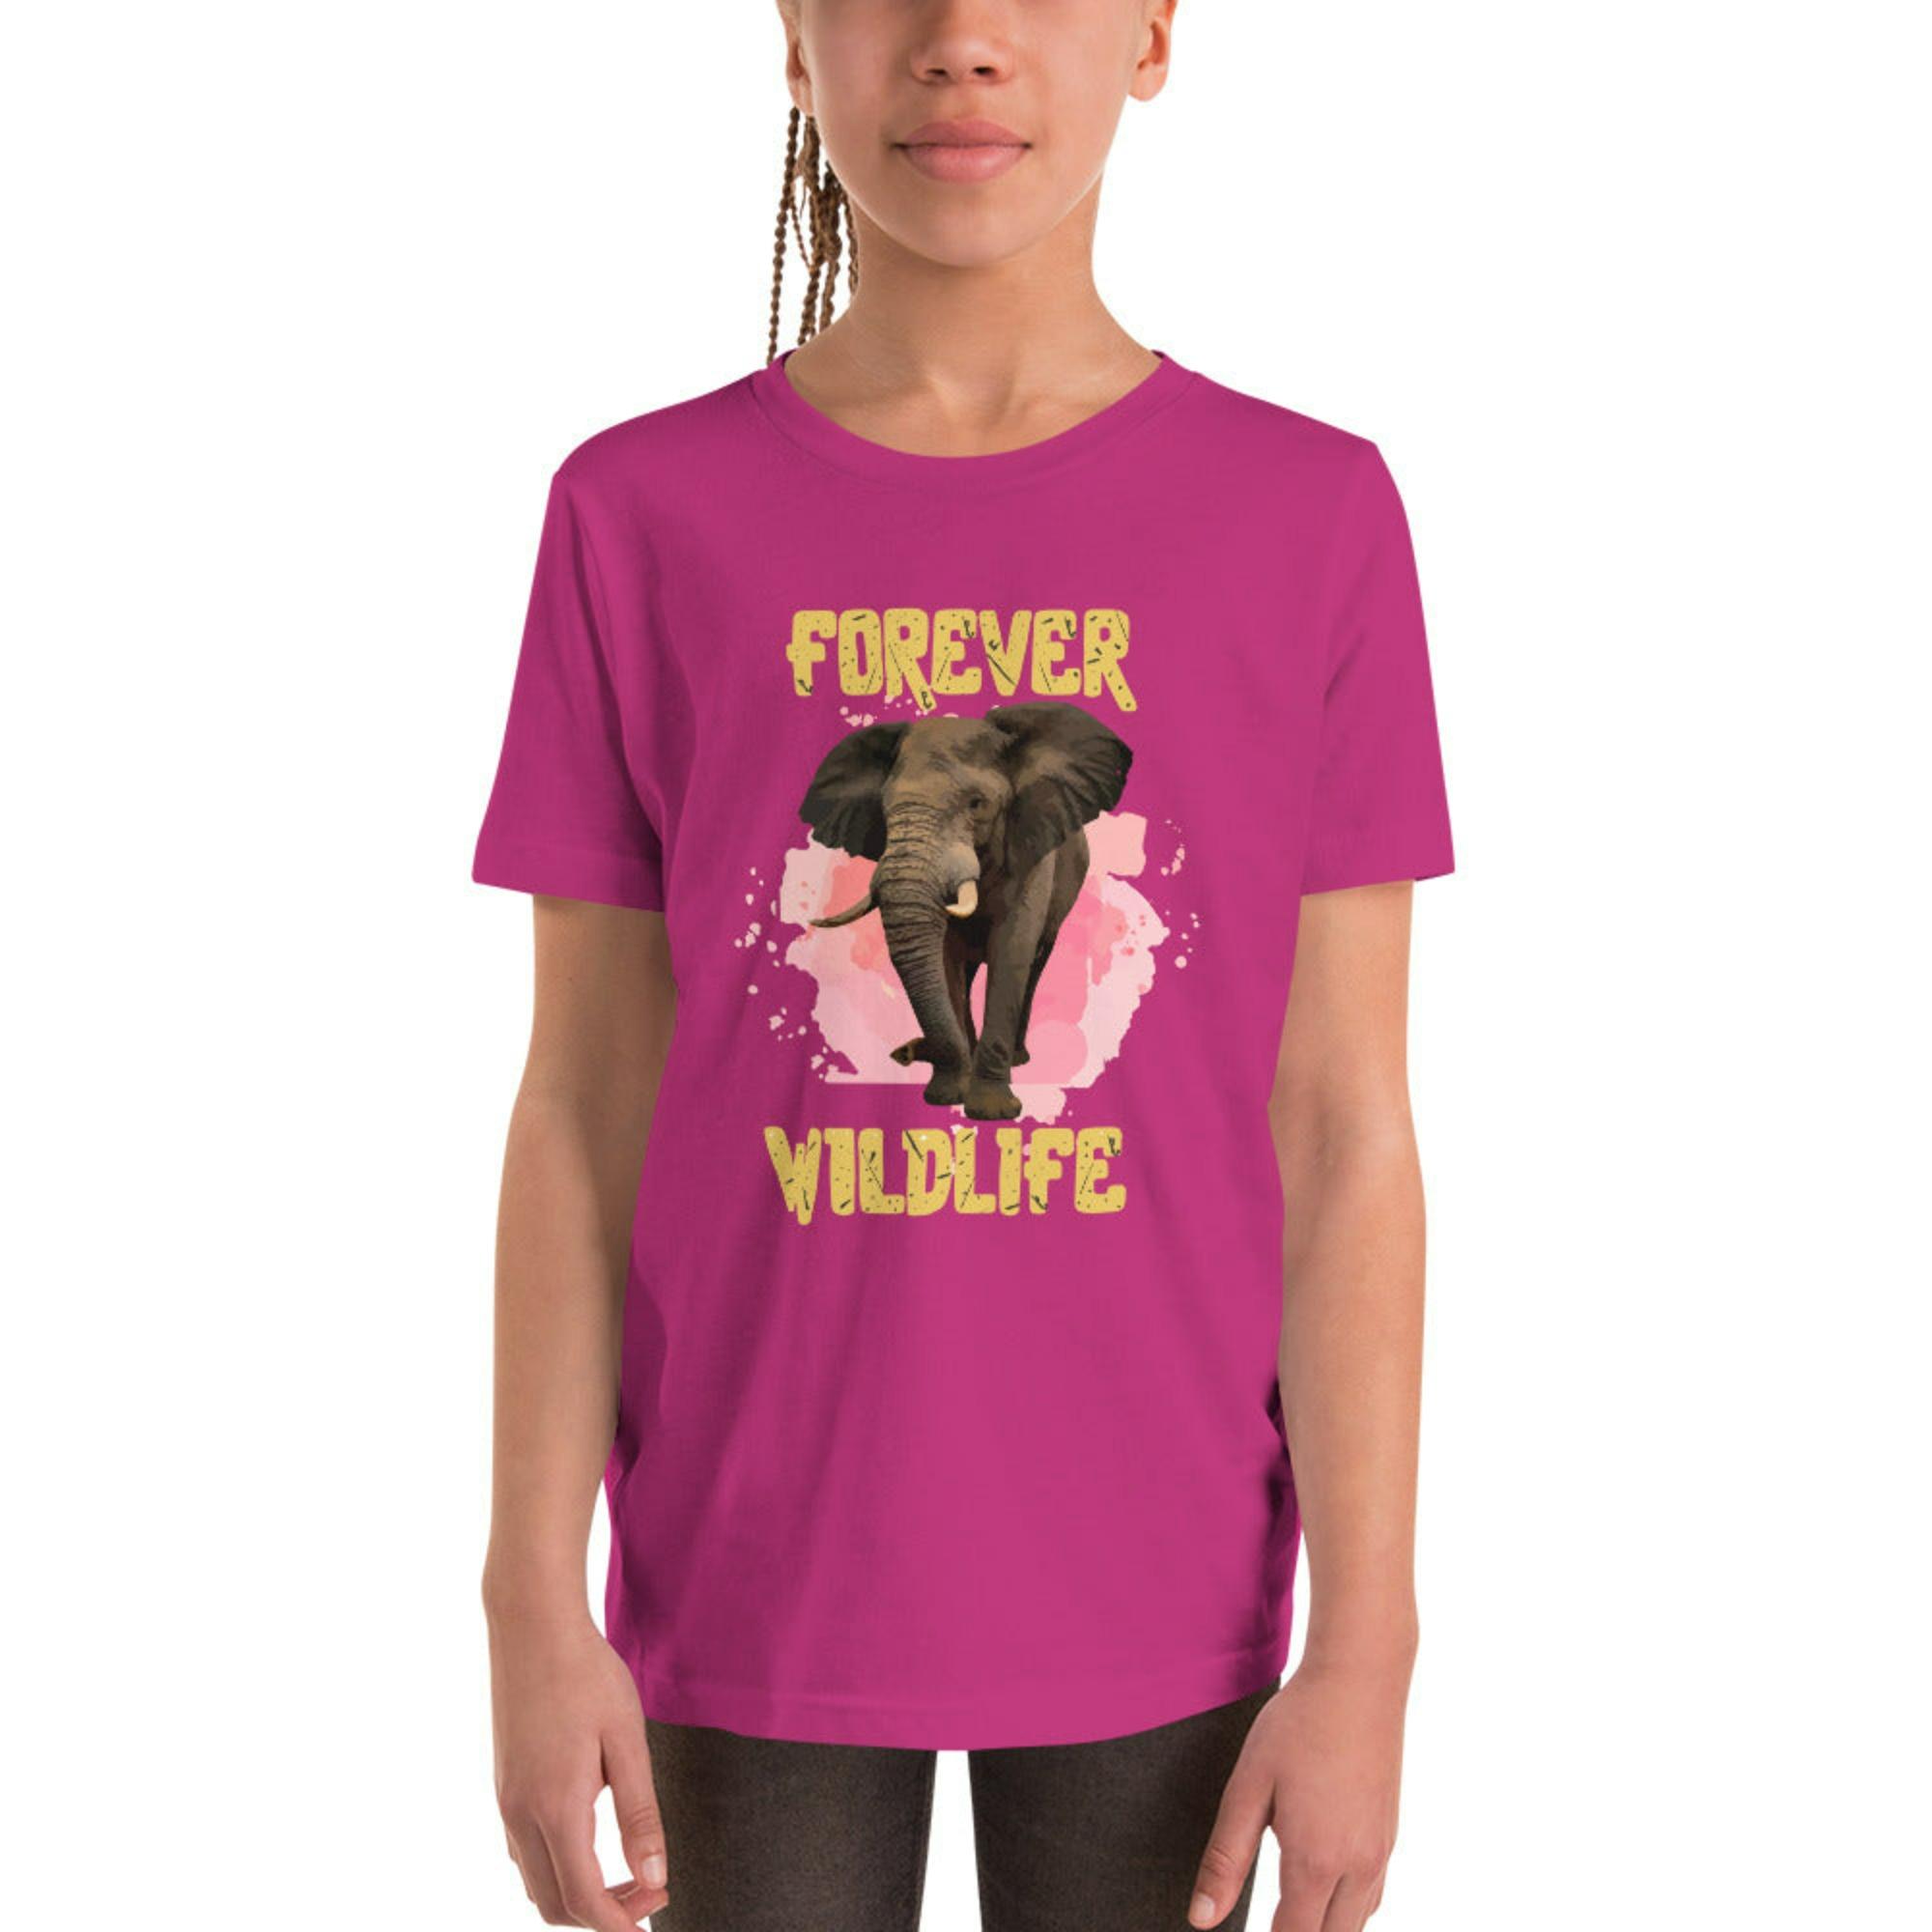 Teen wearing Youth T-Shirt with Elephant graphic as part of Wildlife T Shirts, Wildlife Clothing & Apparel by Forever Wildlife